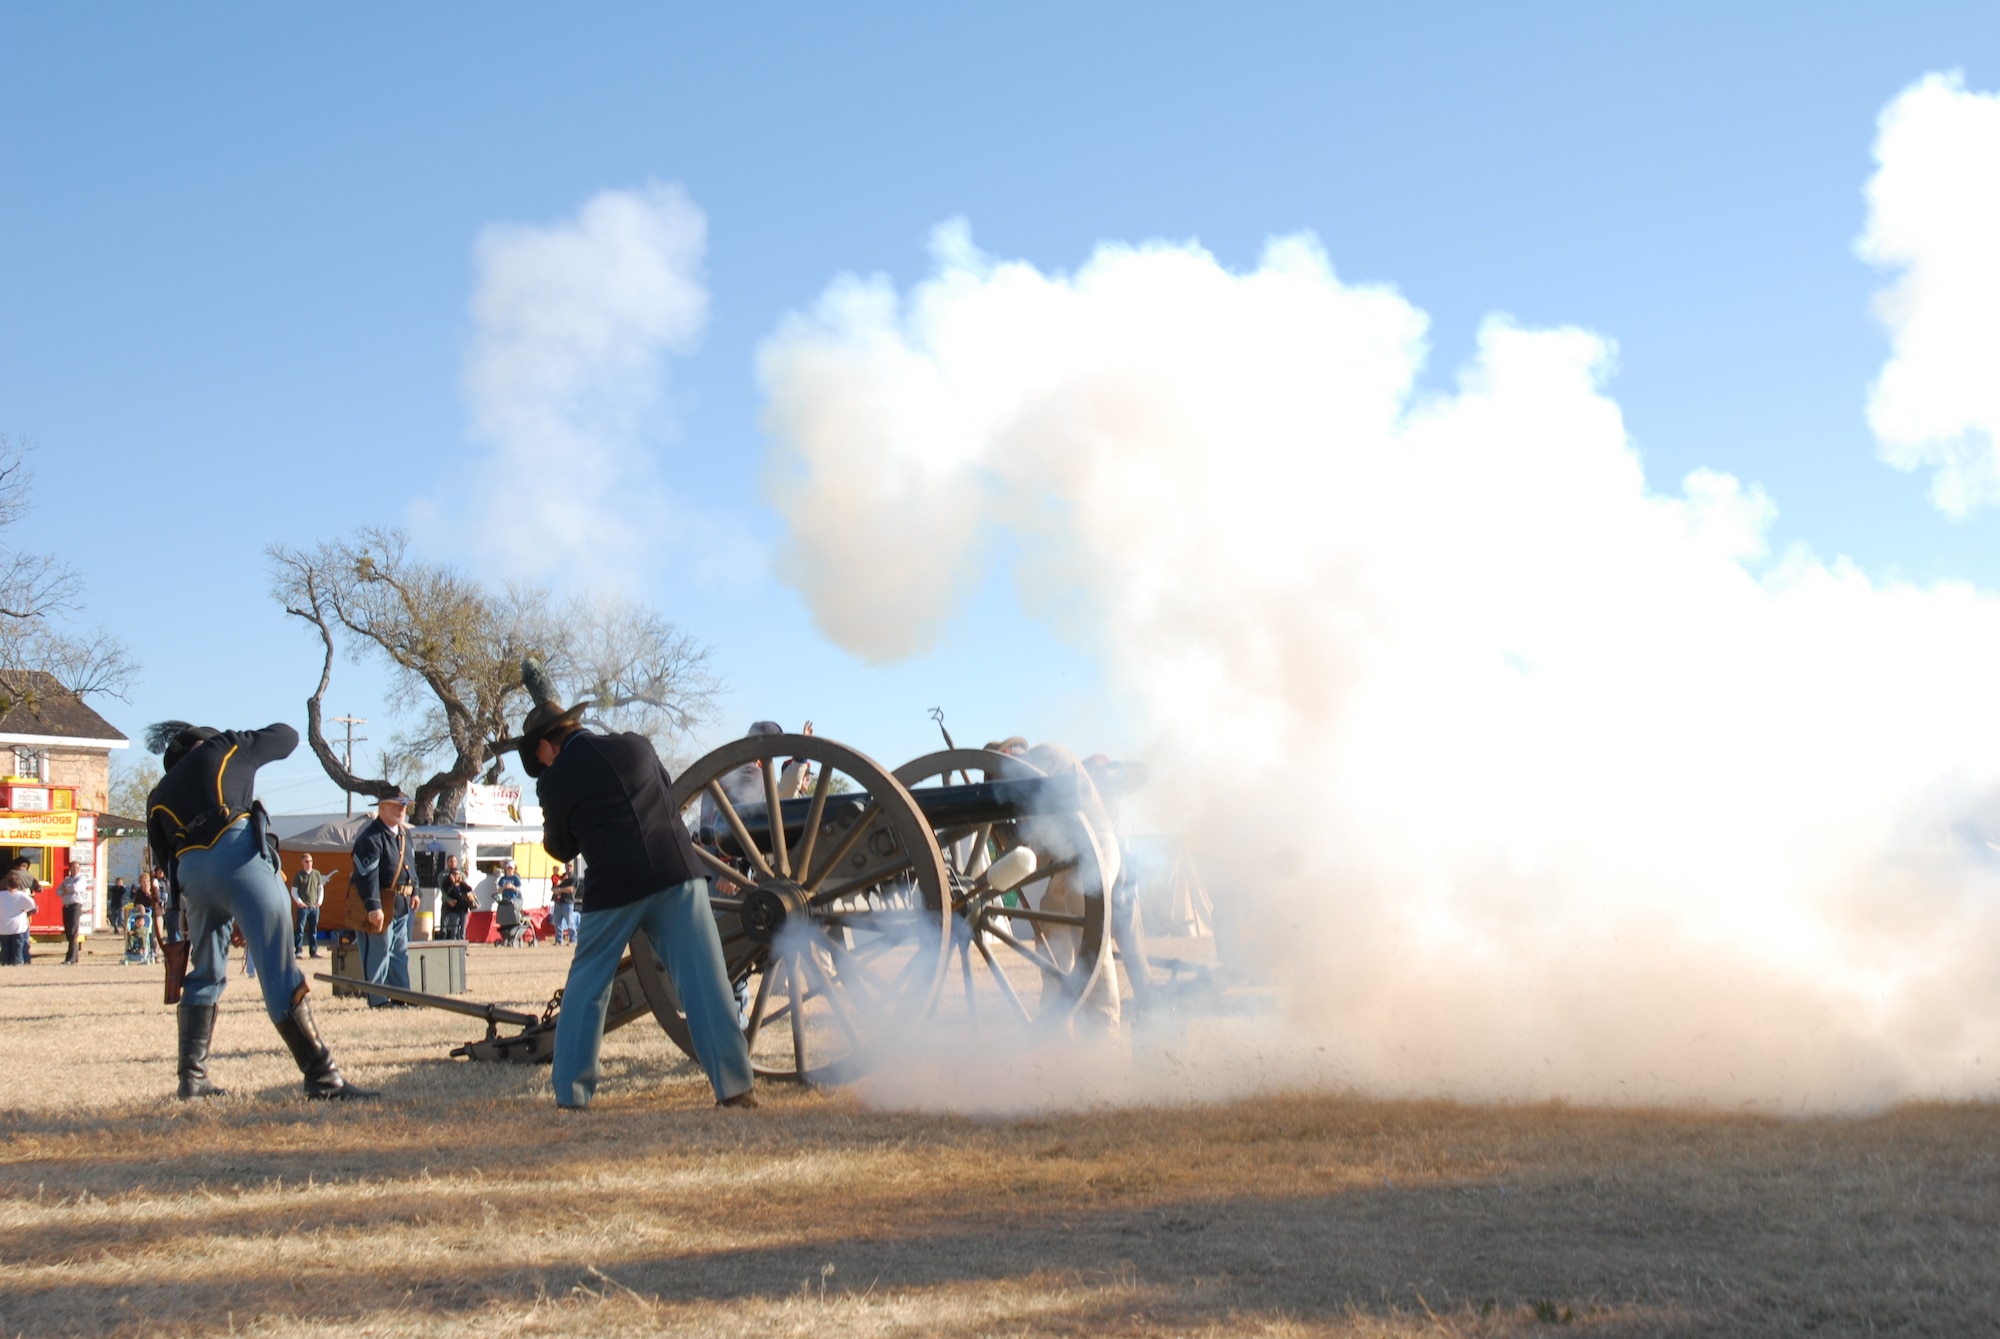 SAN ANGELO, Texas-- Re-enactors from Fort Concho, a historical Army fort dating before the Civil War, fire a cannon from that time period. The unusual "Buffalo Soldiers" nickname was given to the black troops of the frontier west by the Northern Plains Indians after the Civil War, some of whom were stationed at this site. (Courtesy photo)  

